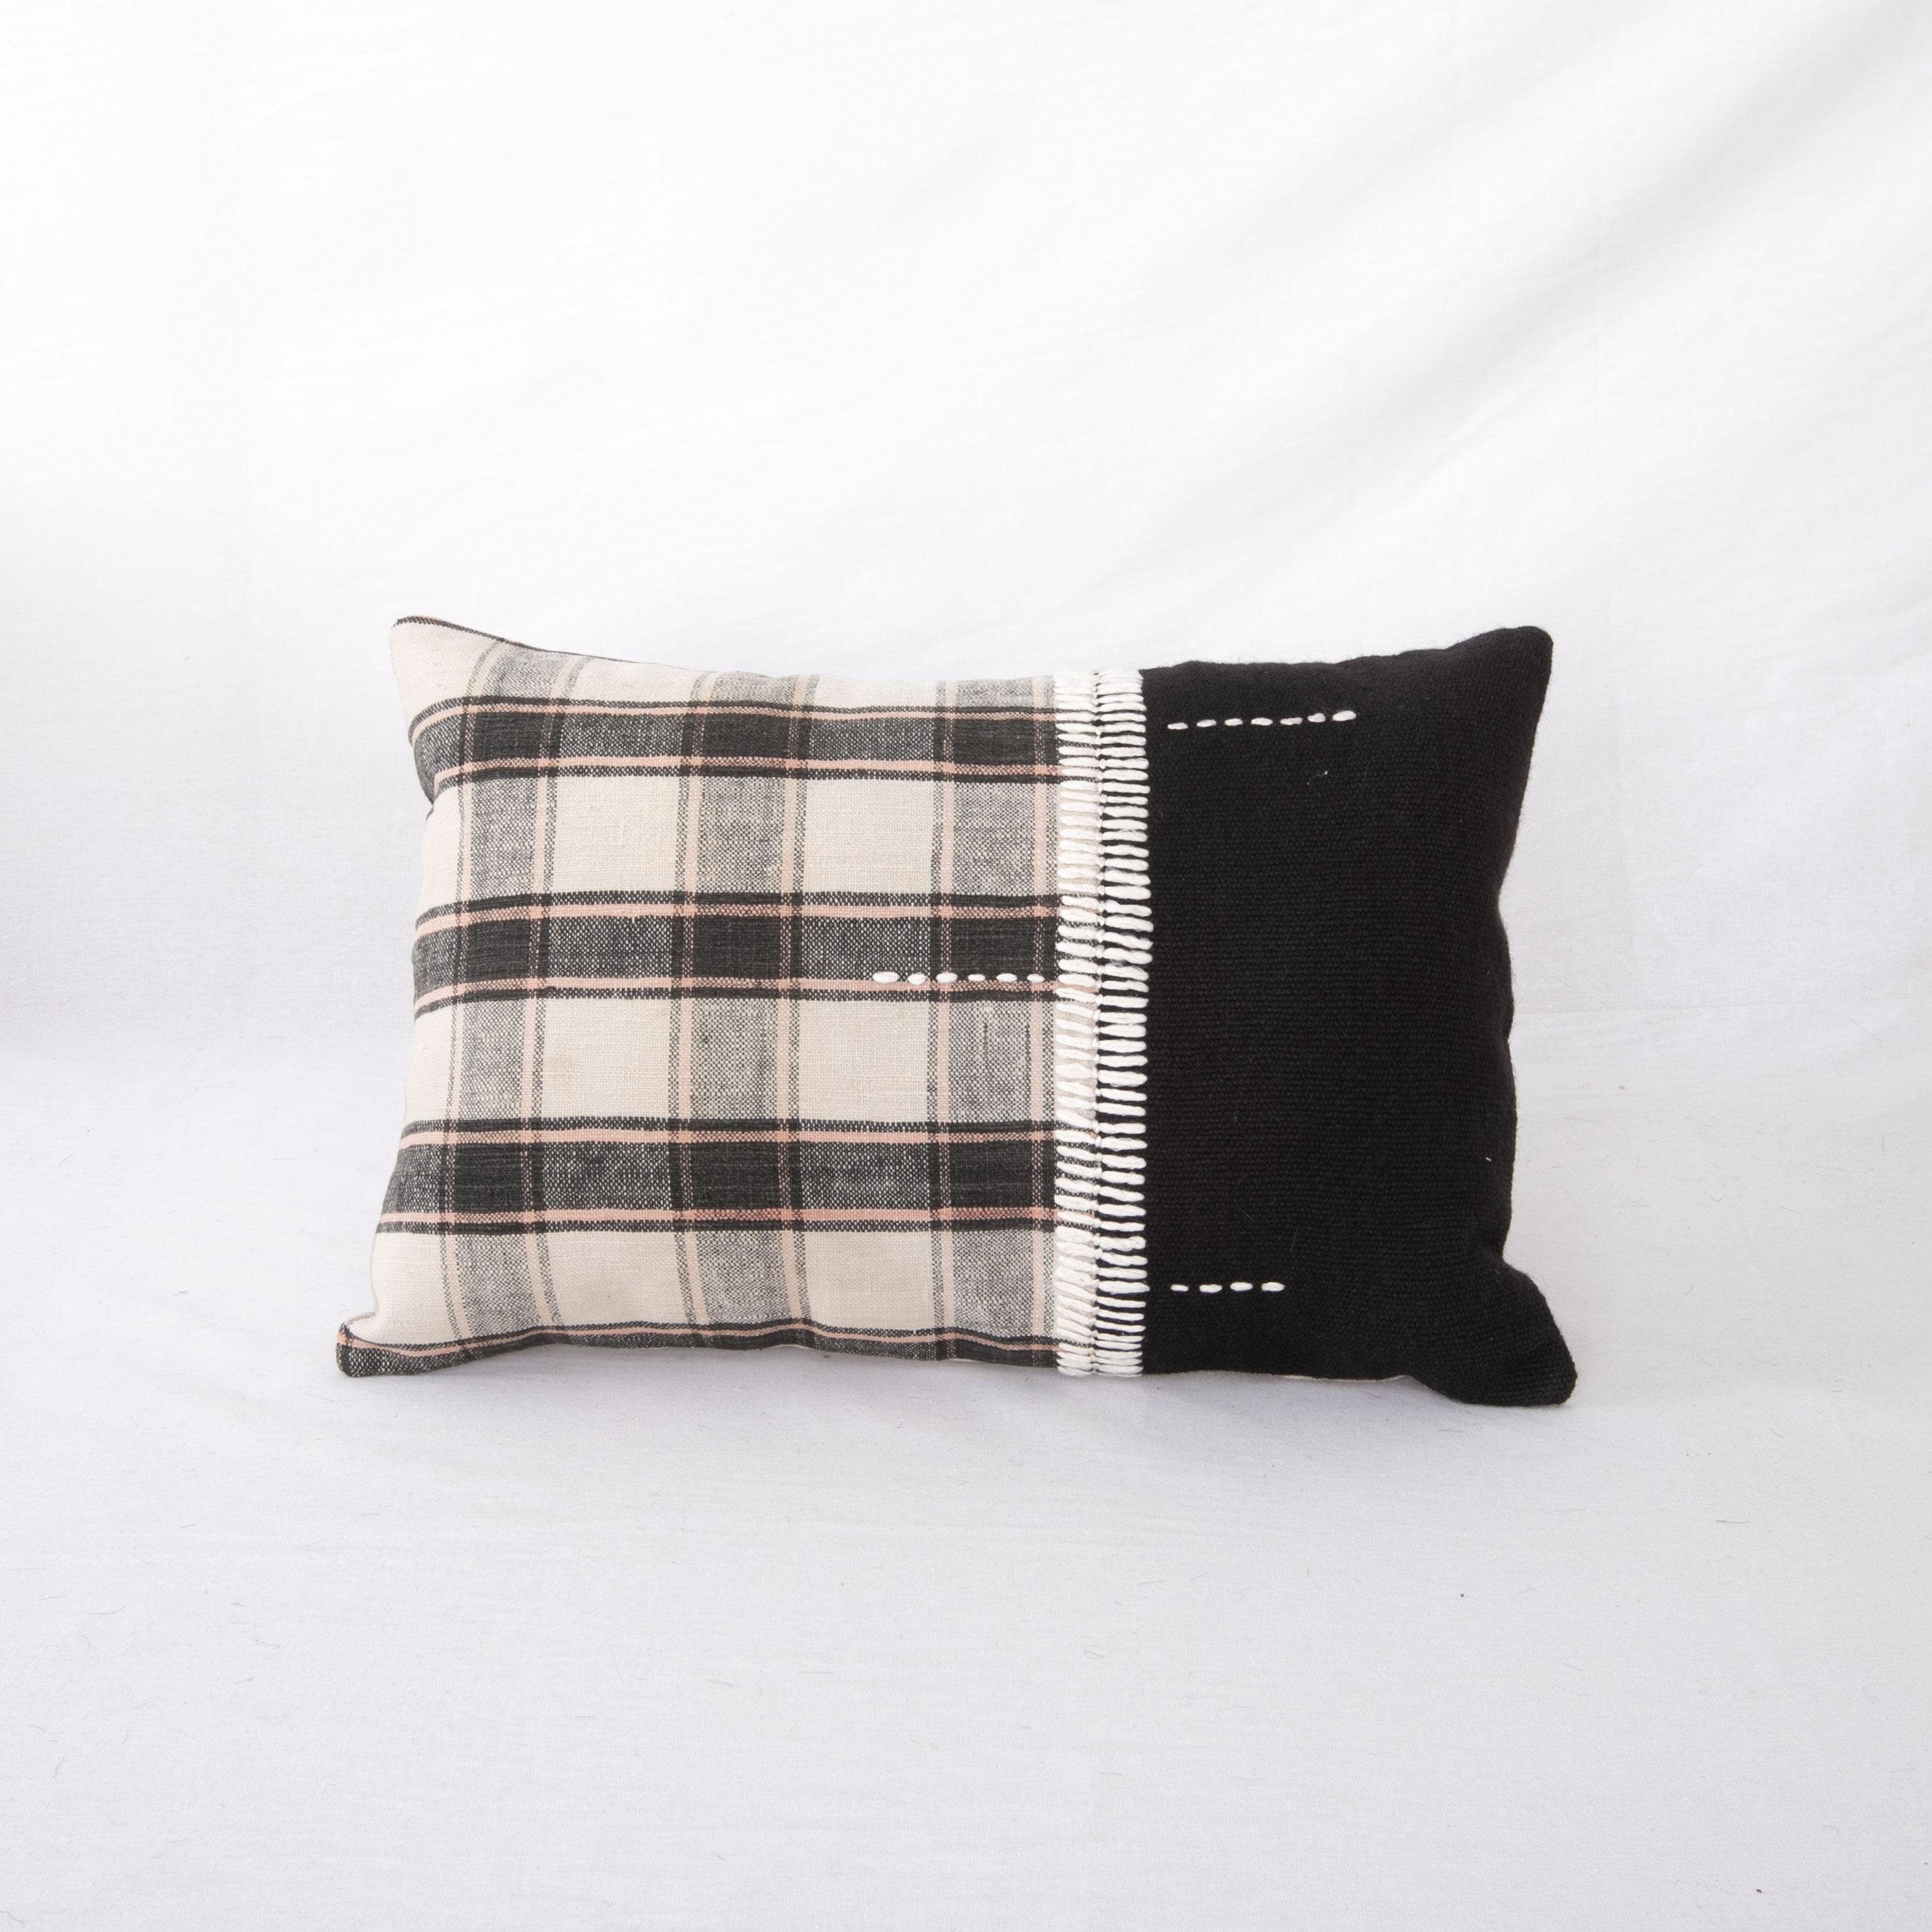 This pillow was made from  vintage hand woven textiles. Our addition to the piece is silk hand stitching as a detail. 
It does not come with an insert. 
Linen in the back. 
Zipper closure.
   
